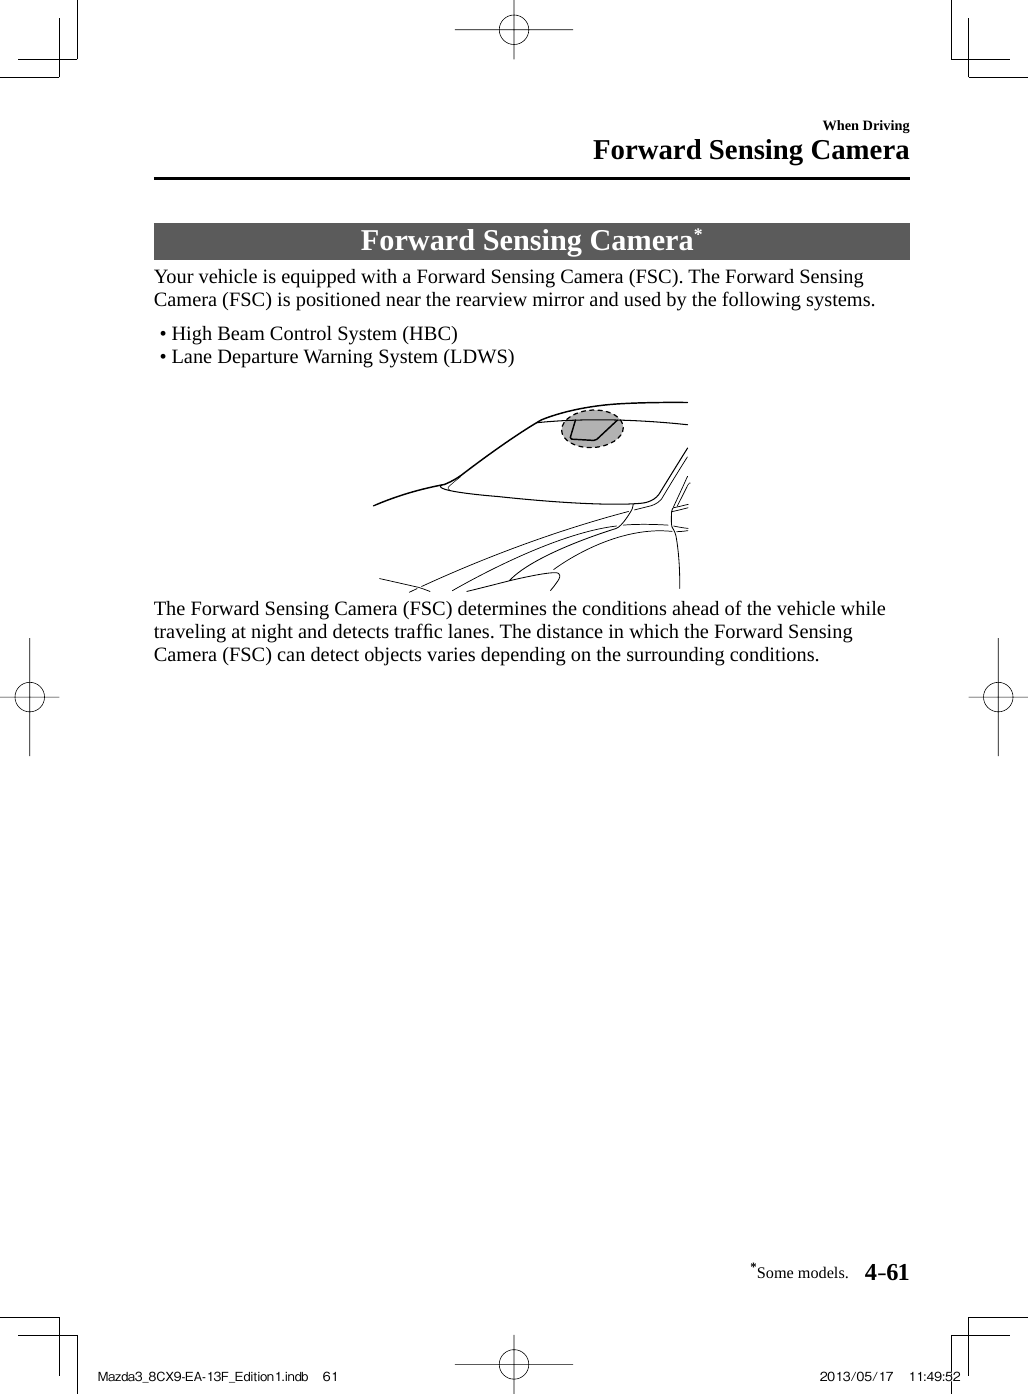 *Some models. 4–61When DrivingForward Sensing Camera     Forward  Sensing  Camera *             Your  vehicle  is  equipped  with  a  Forward  Sensing  Camera  (FSC).  The  Forward  Sensing Camera (FSC) is positioned near the rearview mirror and used by the following systems.   •        High  Beam  Control  System  (HBC)•        Lane  Departure  Warning  System  (LDWS)         The Forward Sensing Camera (FSC) determines the conditions ahead of the vehicle while traveling at night and detects trafﬁ c lanes. The distance in which the Forward Sensing Camera (FSC) can detect objects varies depending on the surrounding conditions.Mazda3_8CX9-EA-13F_Edition1.indb   61Mazda3_8CX9-EA-13F_Edition1.indb   61 2013/05/17   11:49:522013/05/17   11:49:52